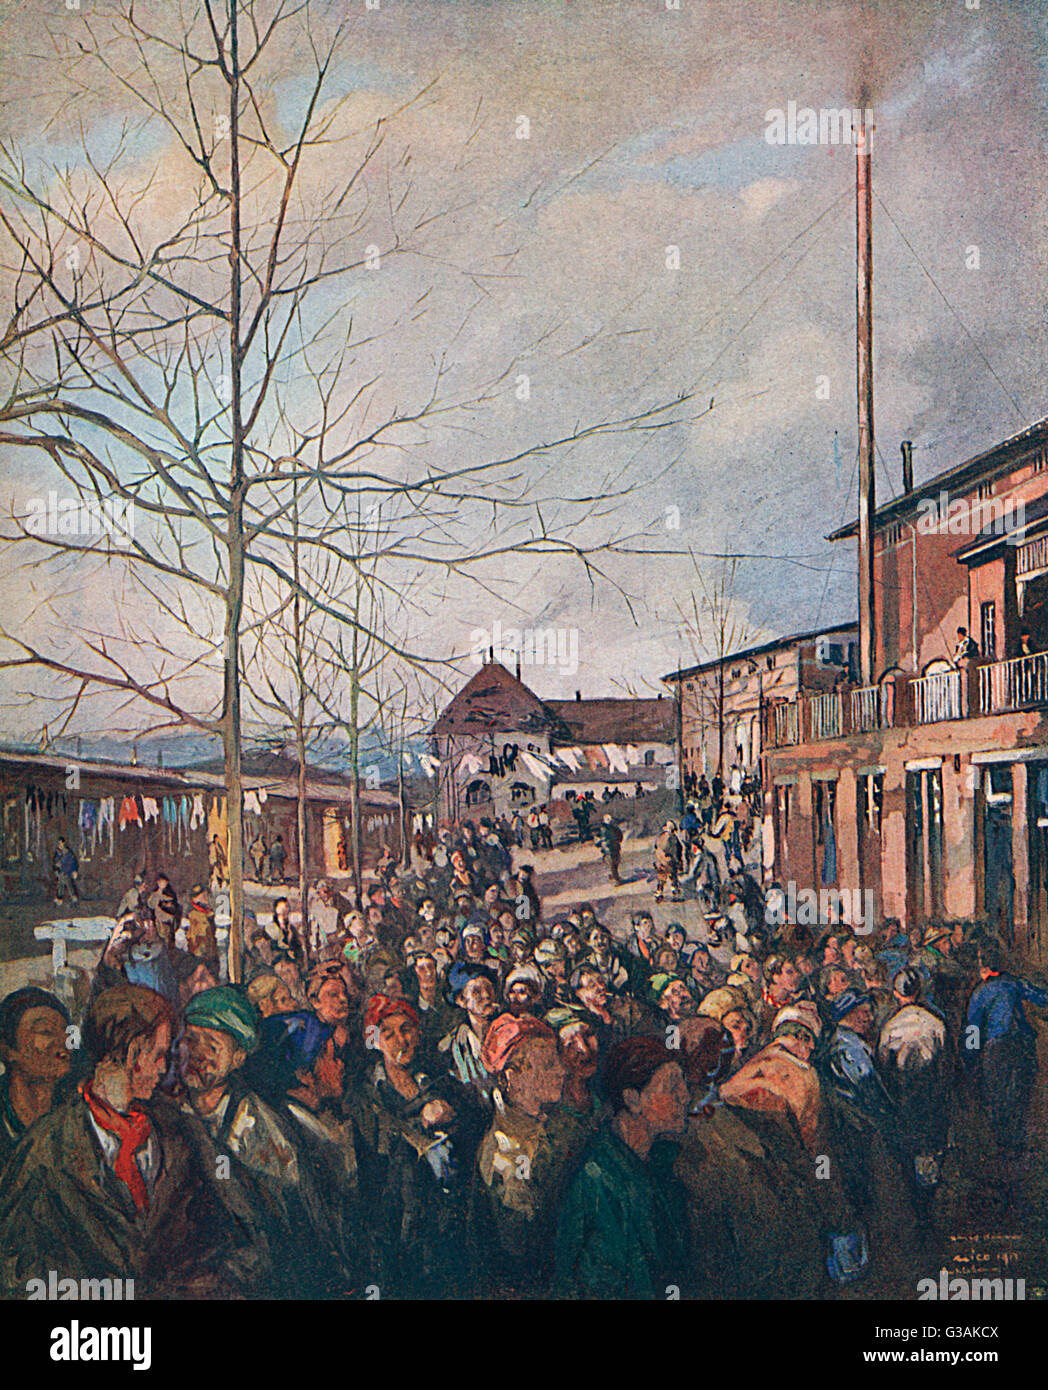 Prisoners at Ruhleben Prisoner of War Camp lining up for their bacon ration at Christmas, painted by artist and Ruhleben prisoner, Nico Jungmann.   The Ruhleben camp was located about 10km west of Berlin and was originally a racecourse. It was converted d Stock Photo